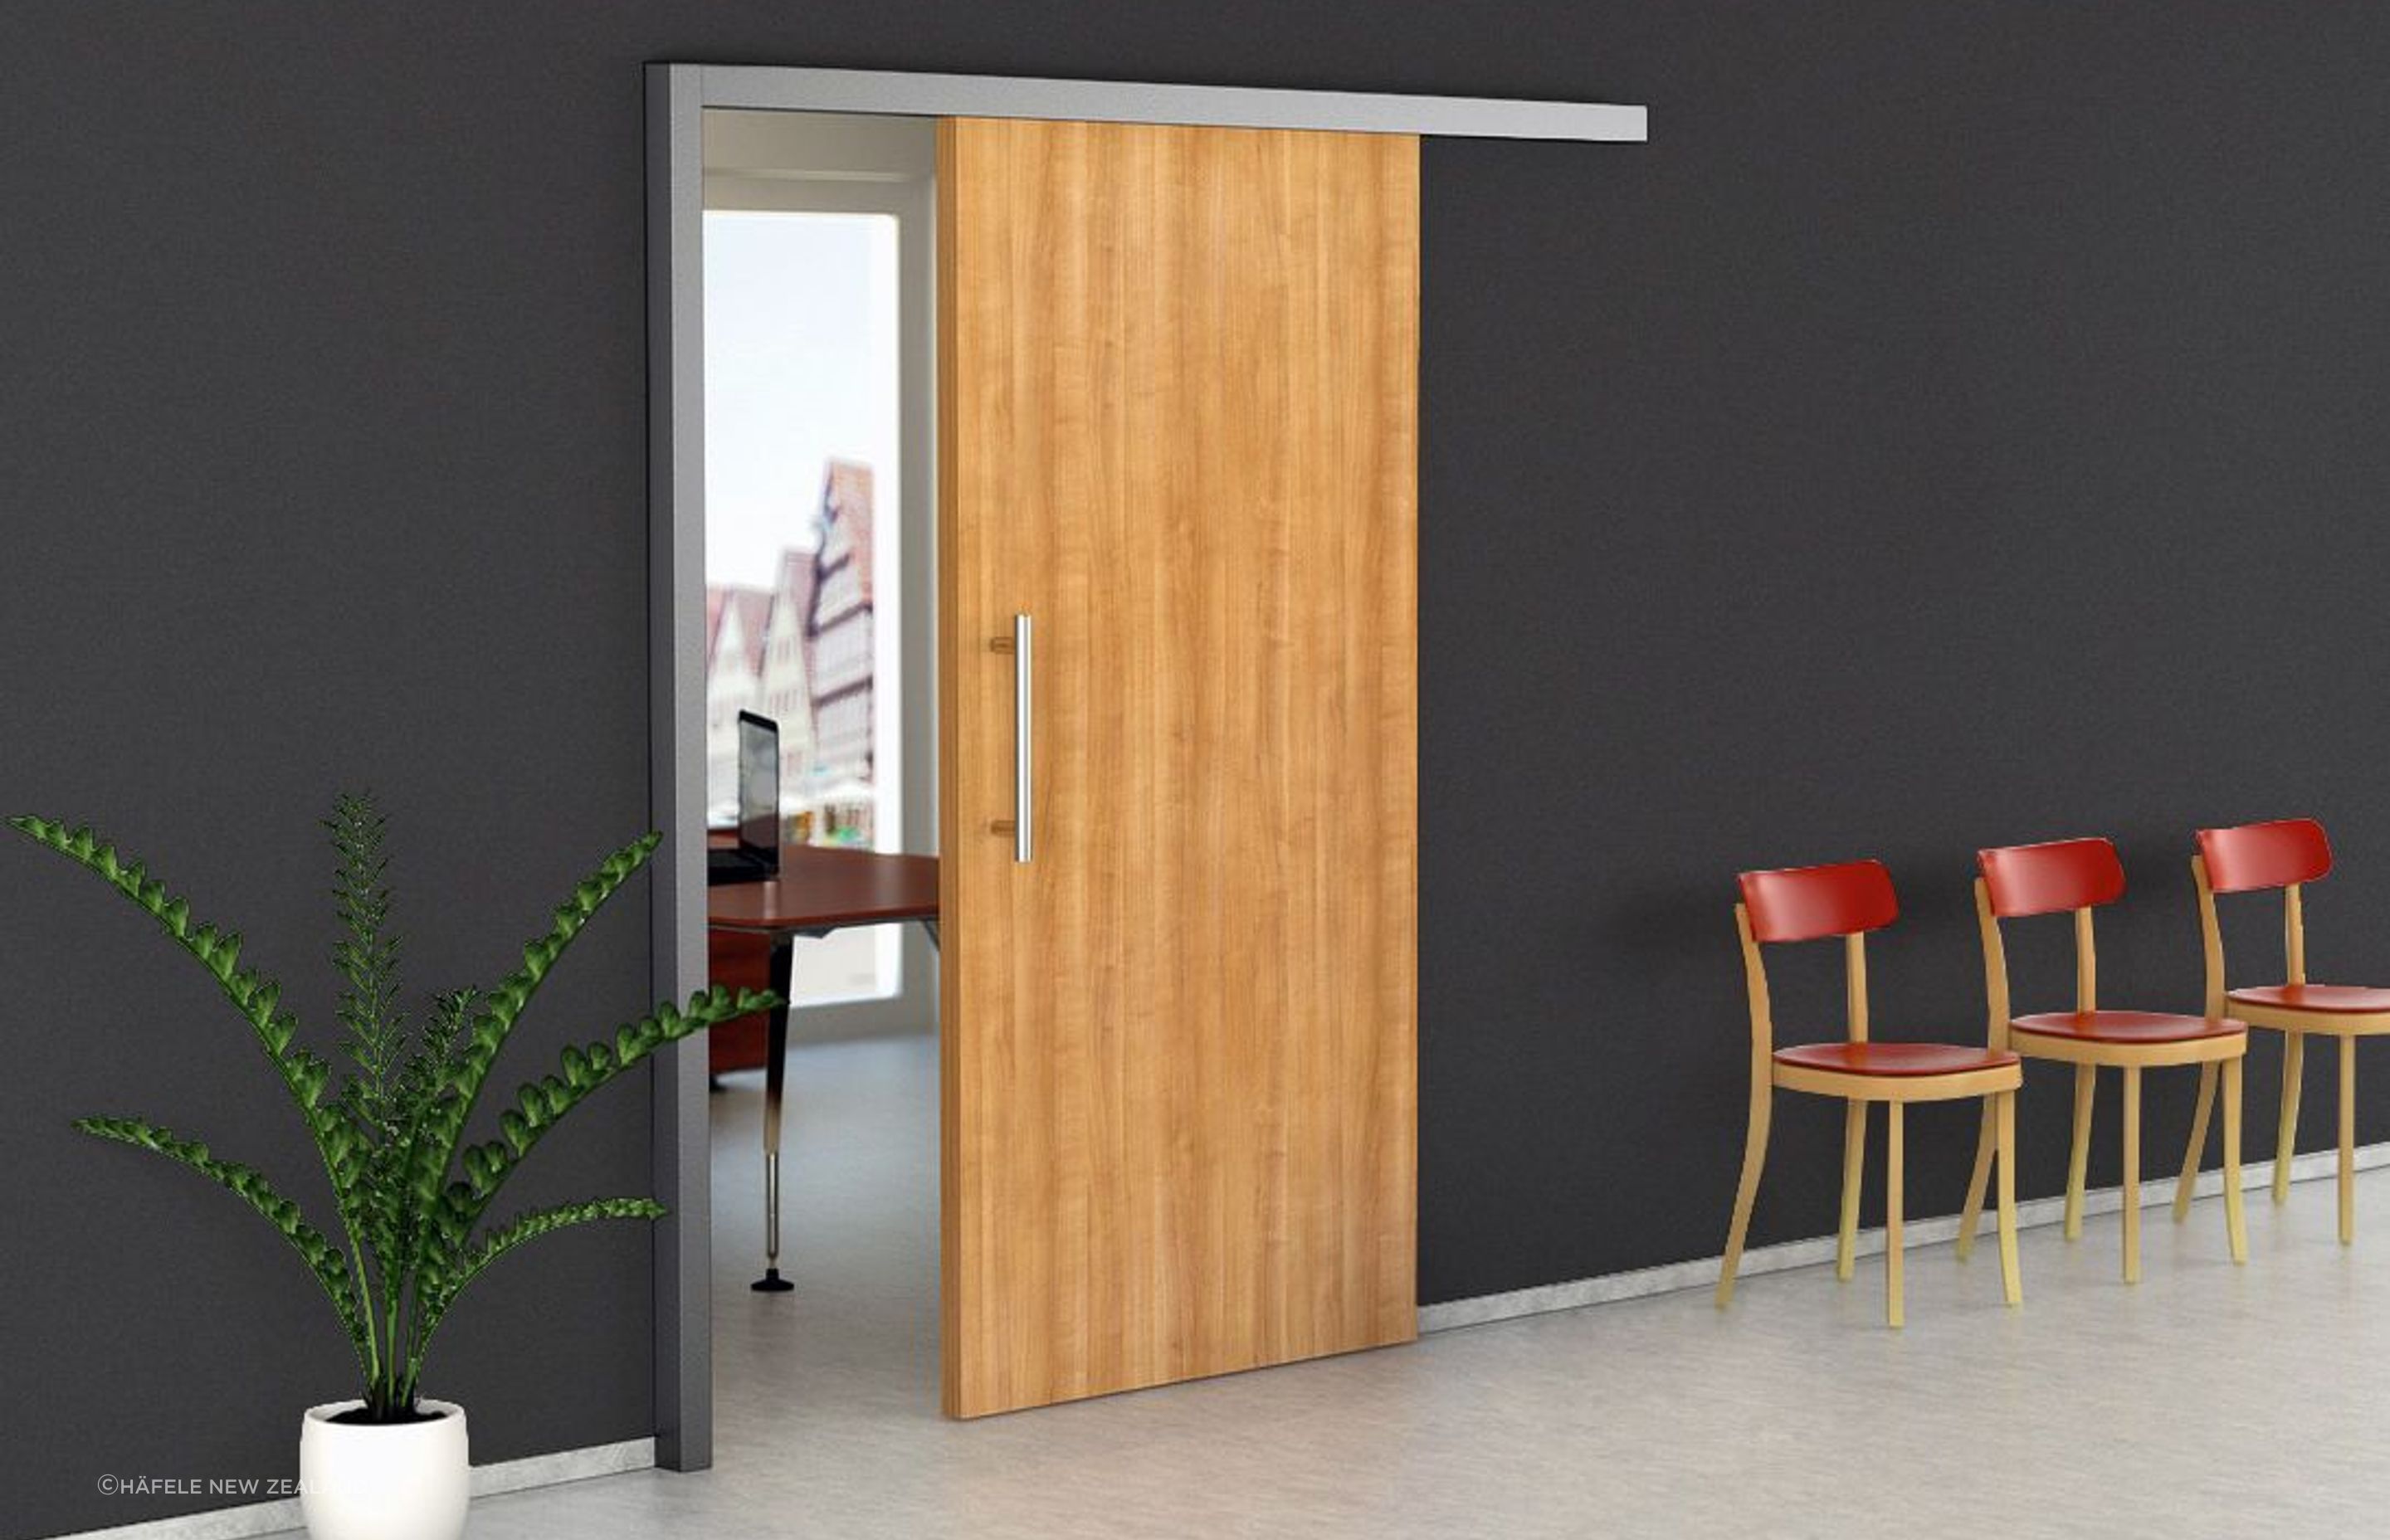 The benefits of offset doors can be enhanced by using soundproof models, like this soundproof sliding door from Hafele.